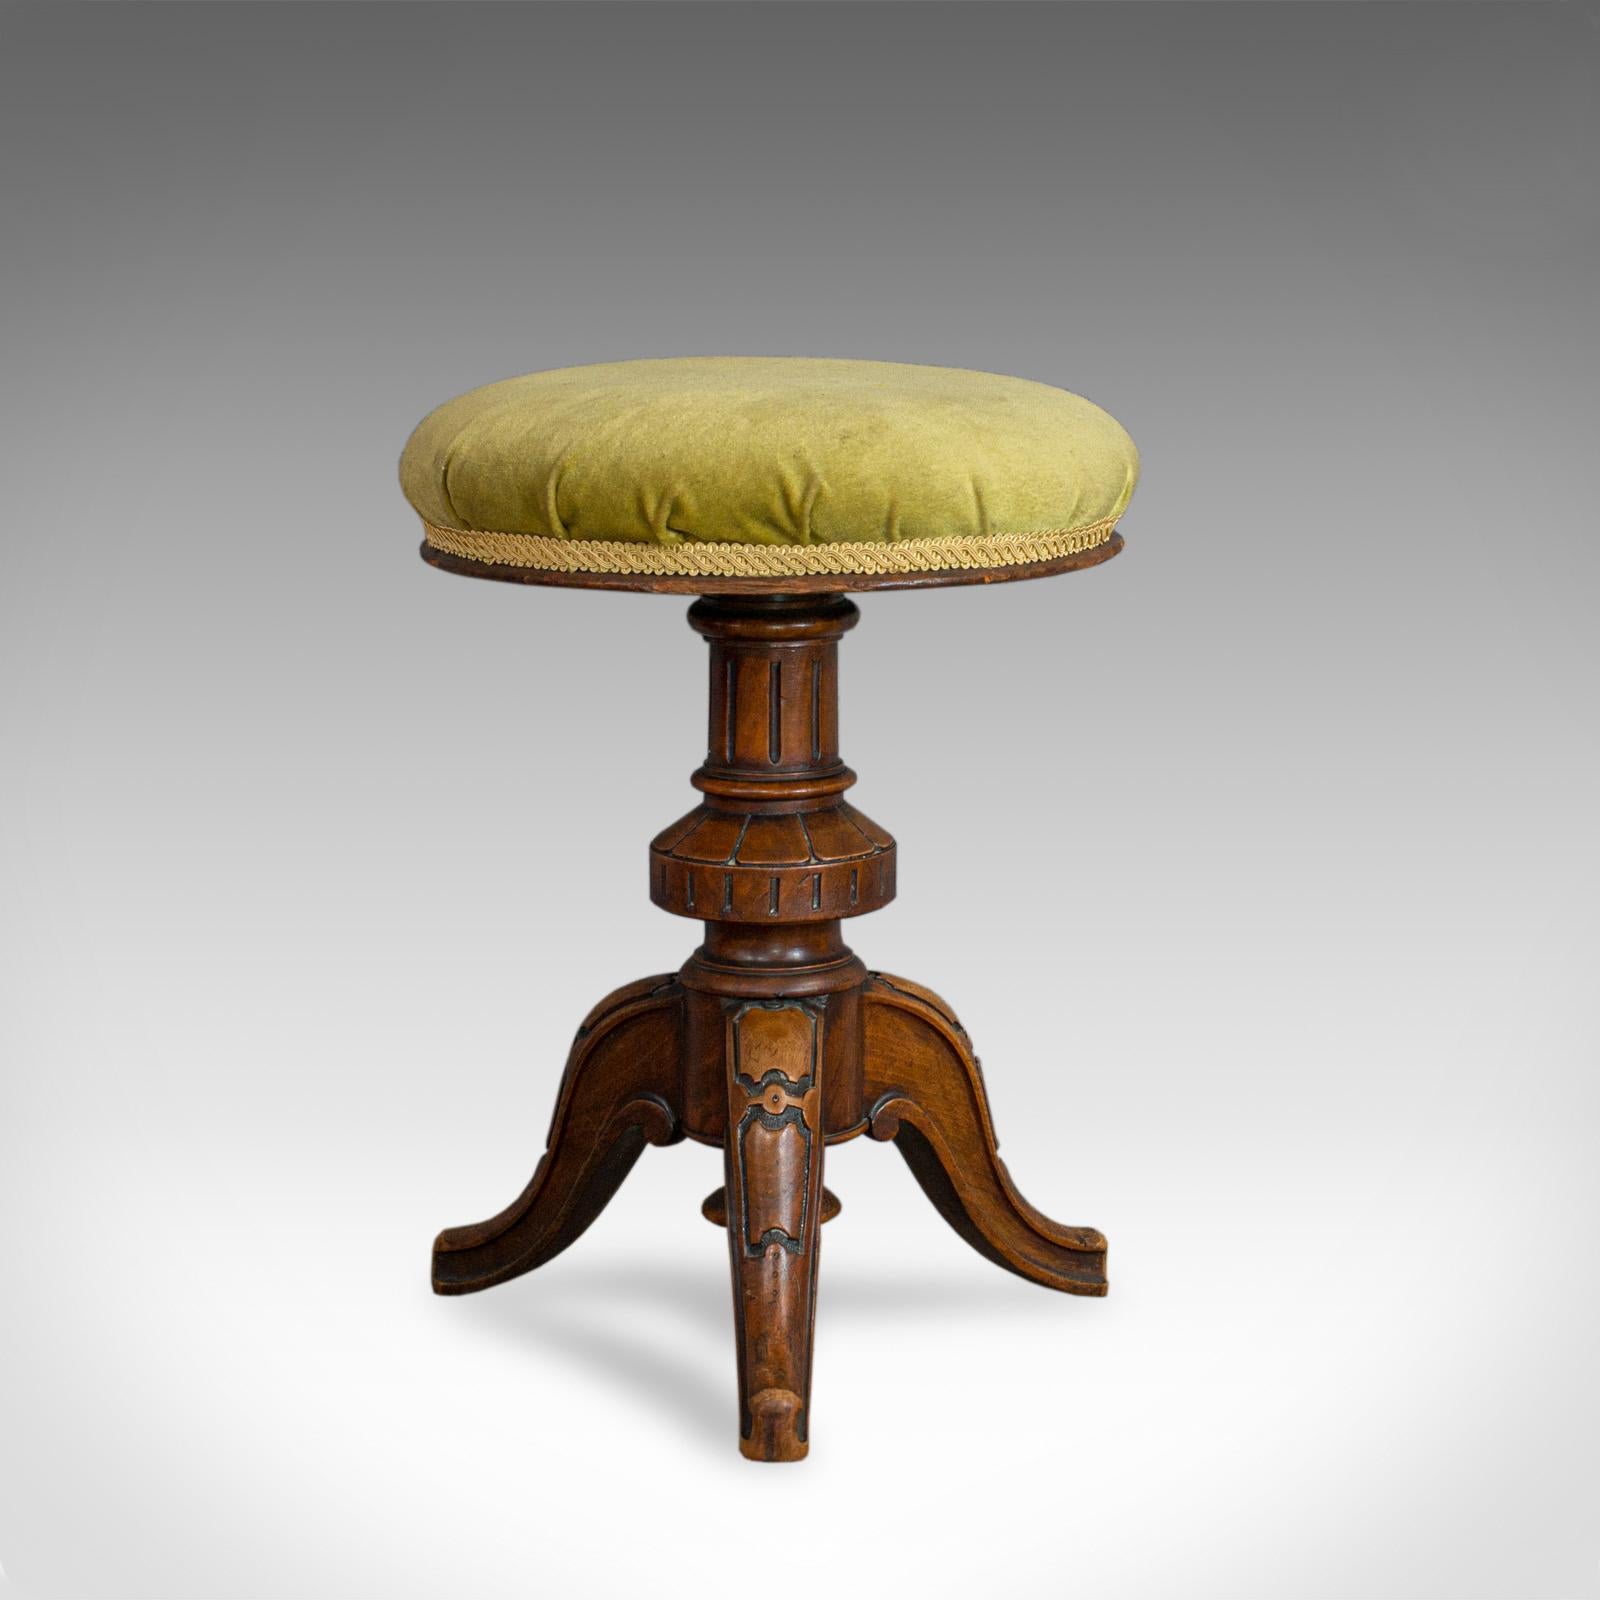 This is an antique adjustable piano stool. An English, Victorian walnut music seat dating to the late 19th century, circa 1870.

Select walnut displays a rich caramel hue with fine grain interest
Good consistent colour throughout and a desirable